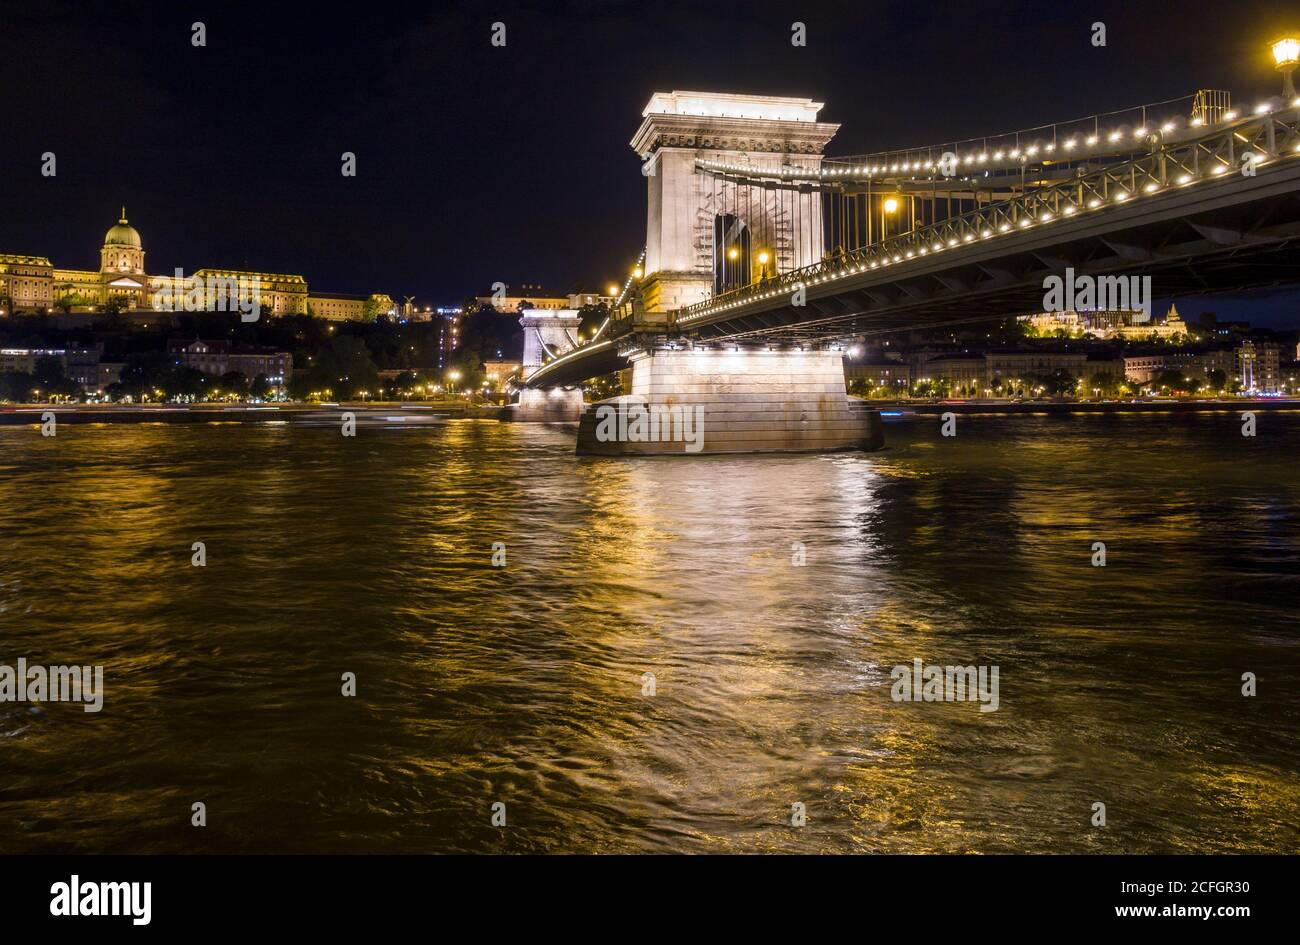 Chain Bridge over the Danube at night: The Széchenyi Chain Bridge in central Budapest with the Palace and Buda in the background all lit at night. Stock Photo